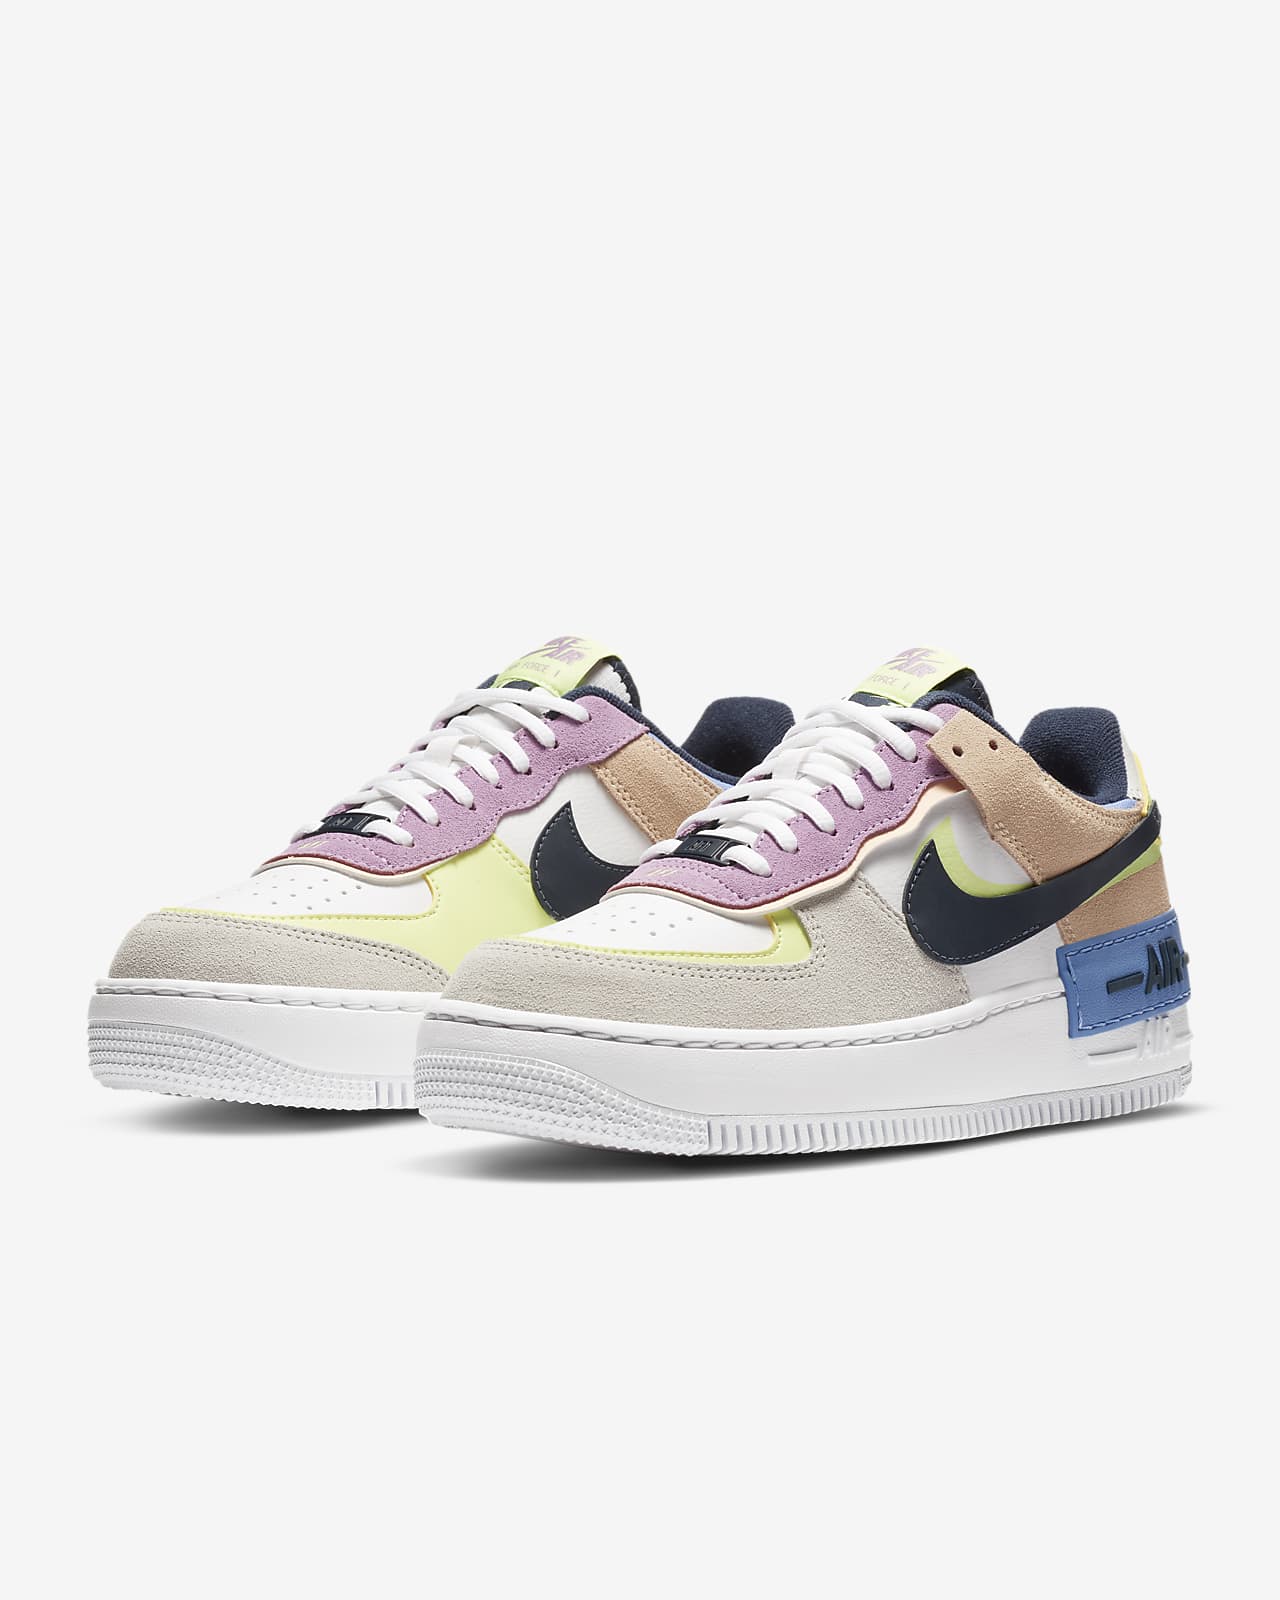 nike air force 1 shadow women's size 8